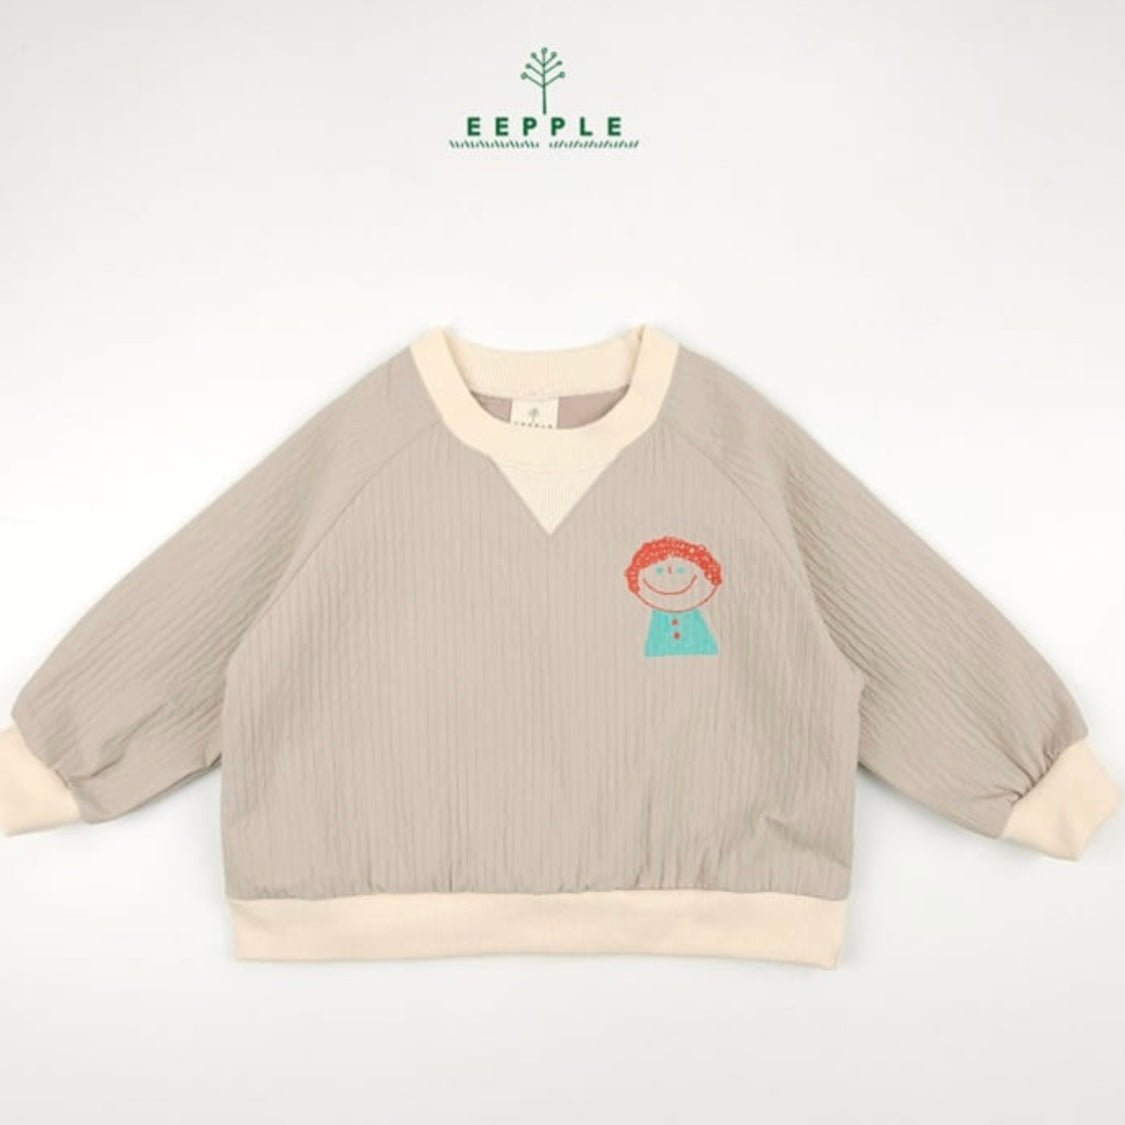 V Sweatshirt find Stylish Fashion for Little People- at Little Foxx Concept Store